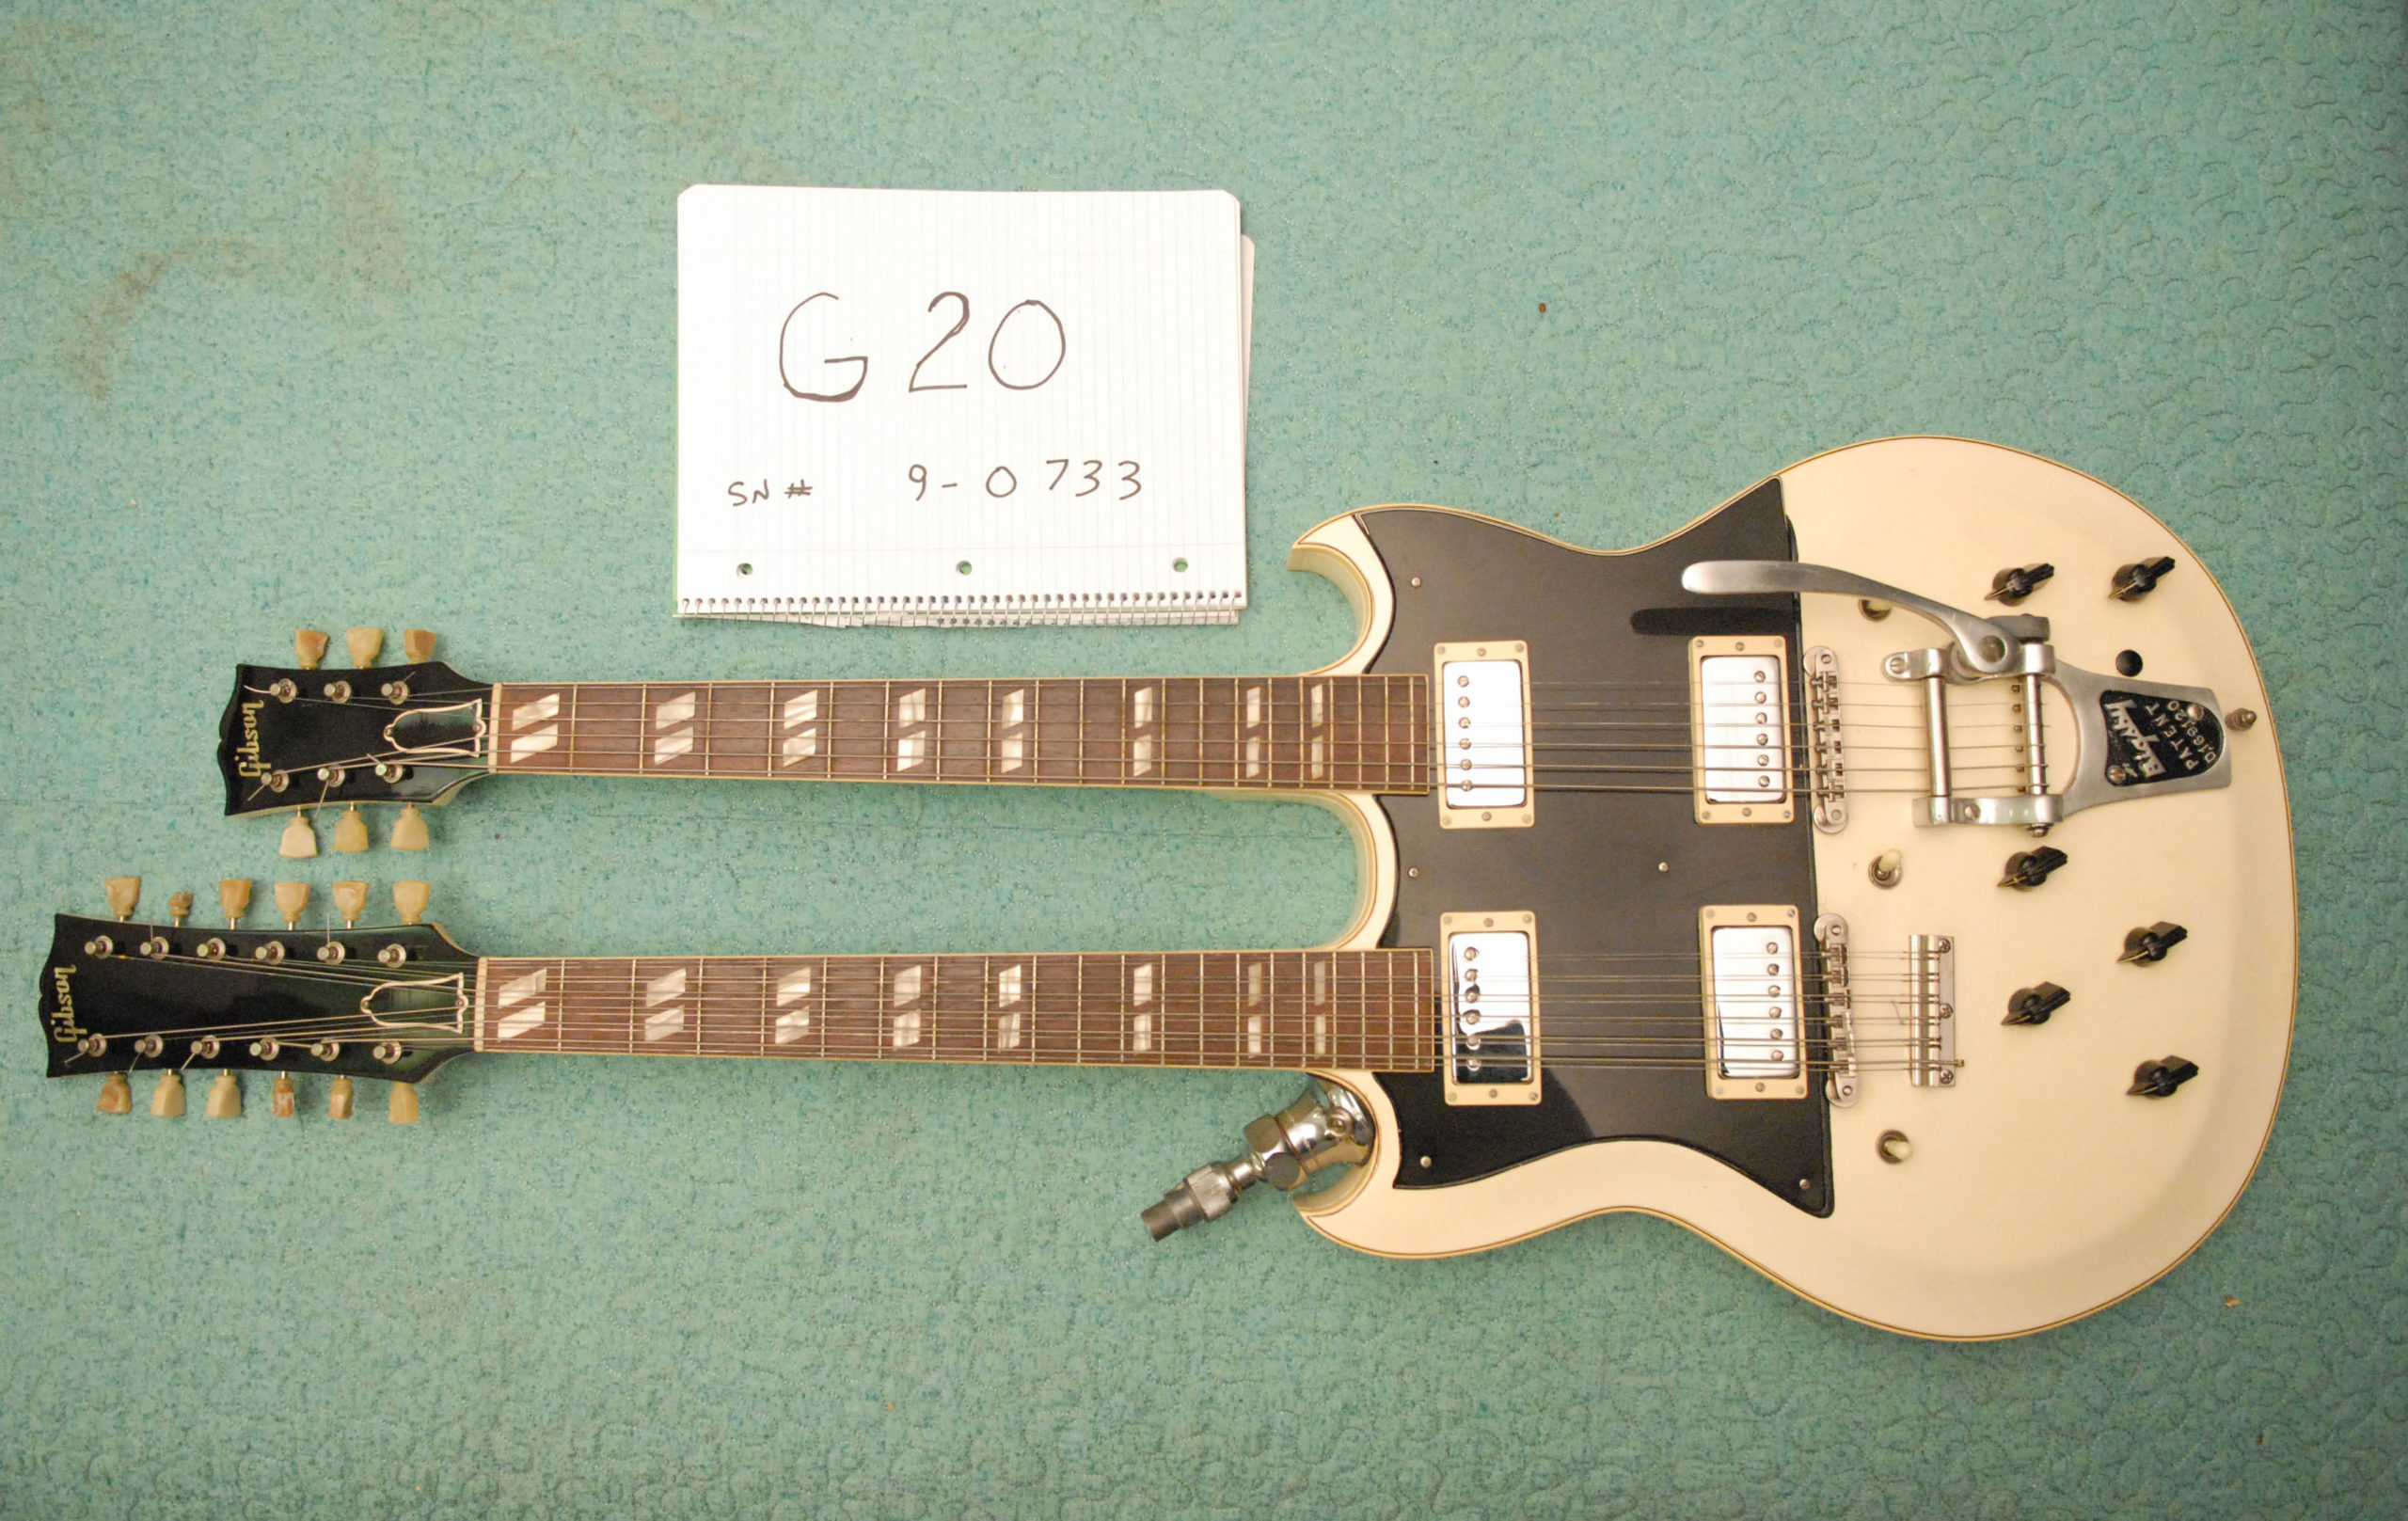 1959-Gibson-Doubleneck-6-and-12-string-highly-modified-with-mic-input-on-upper-cutaway-scaled.jpg